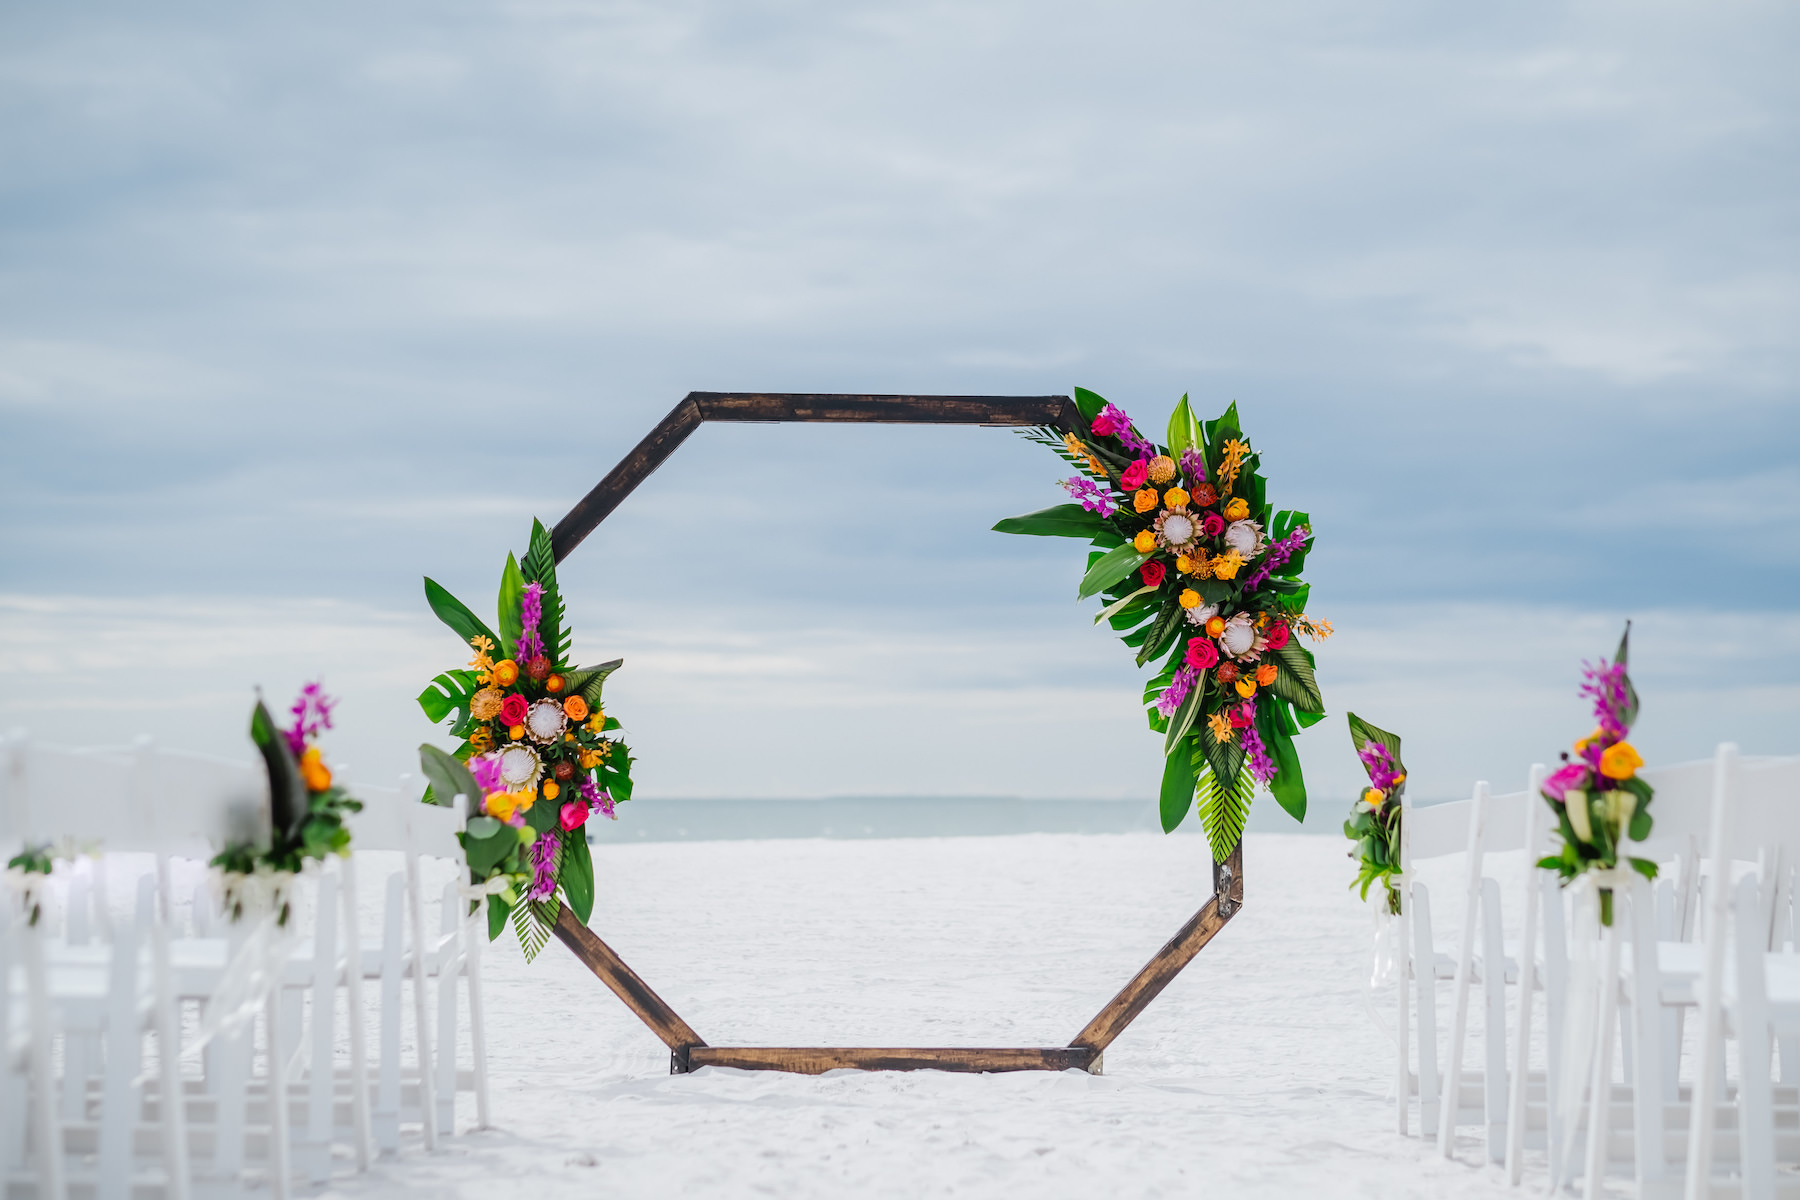 INSTAGRAM Clearwater Beach Waterfront Beachfront Wedding Reception Decor, Tropical Floral Arrangements, King Proteas, Palm Fronds, Monstera Palm Leaves, Orange, Pink, Purple and Yellow Floral Arrangements on Geometric Octagonal Ceremony Arch